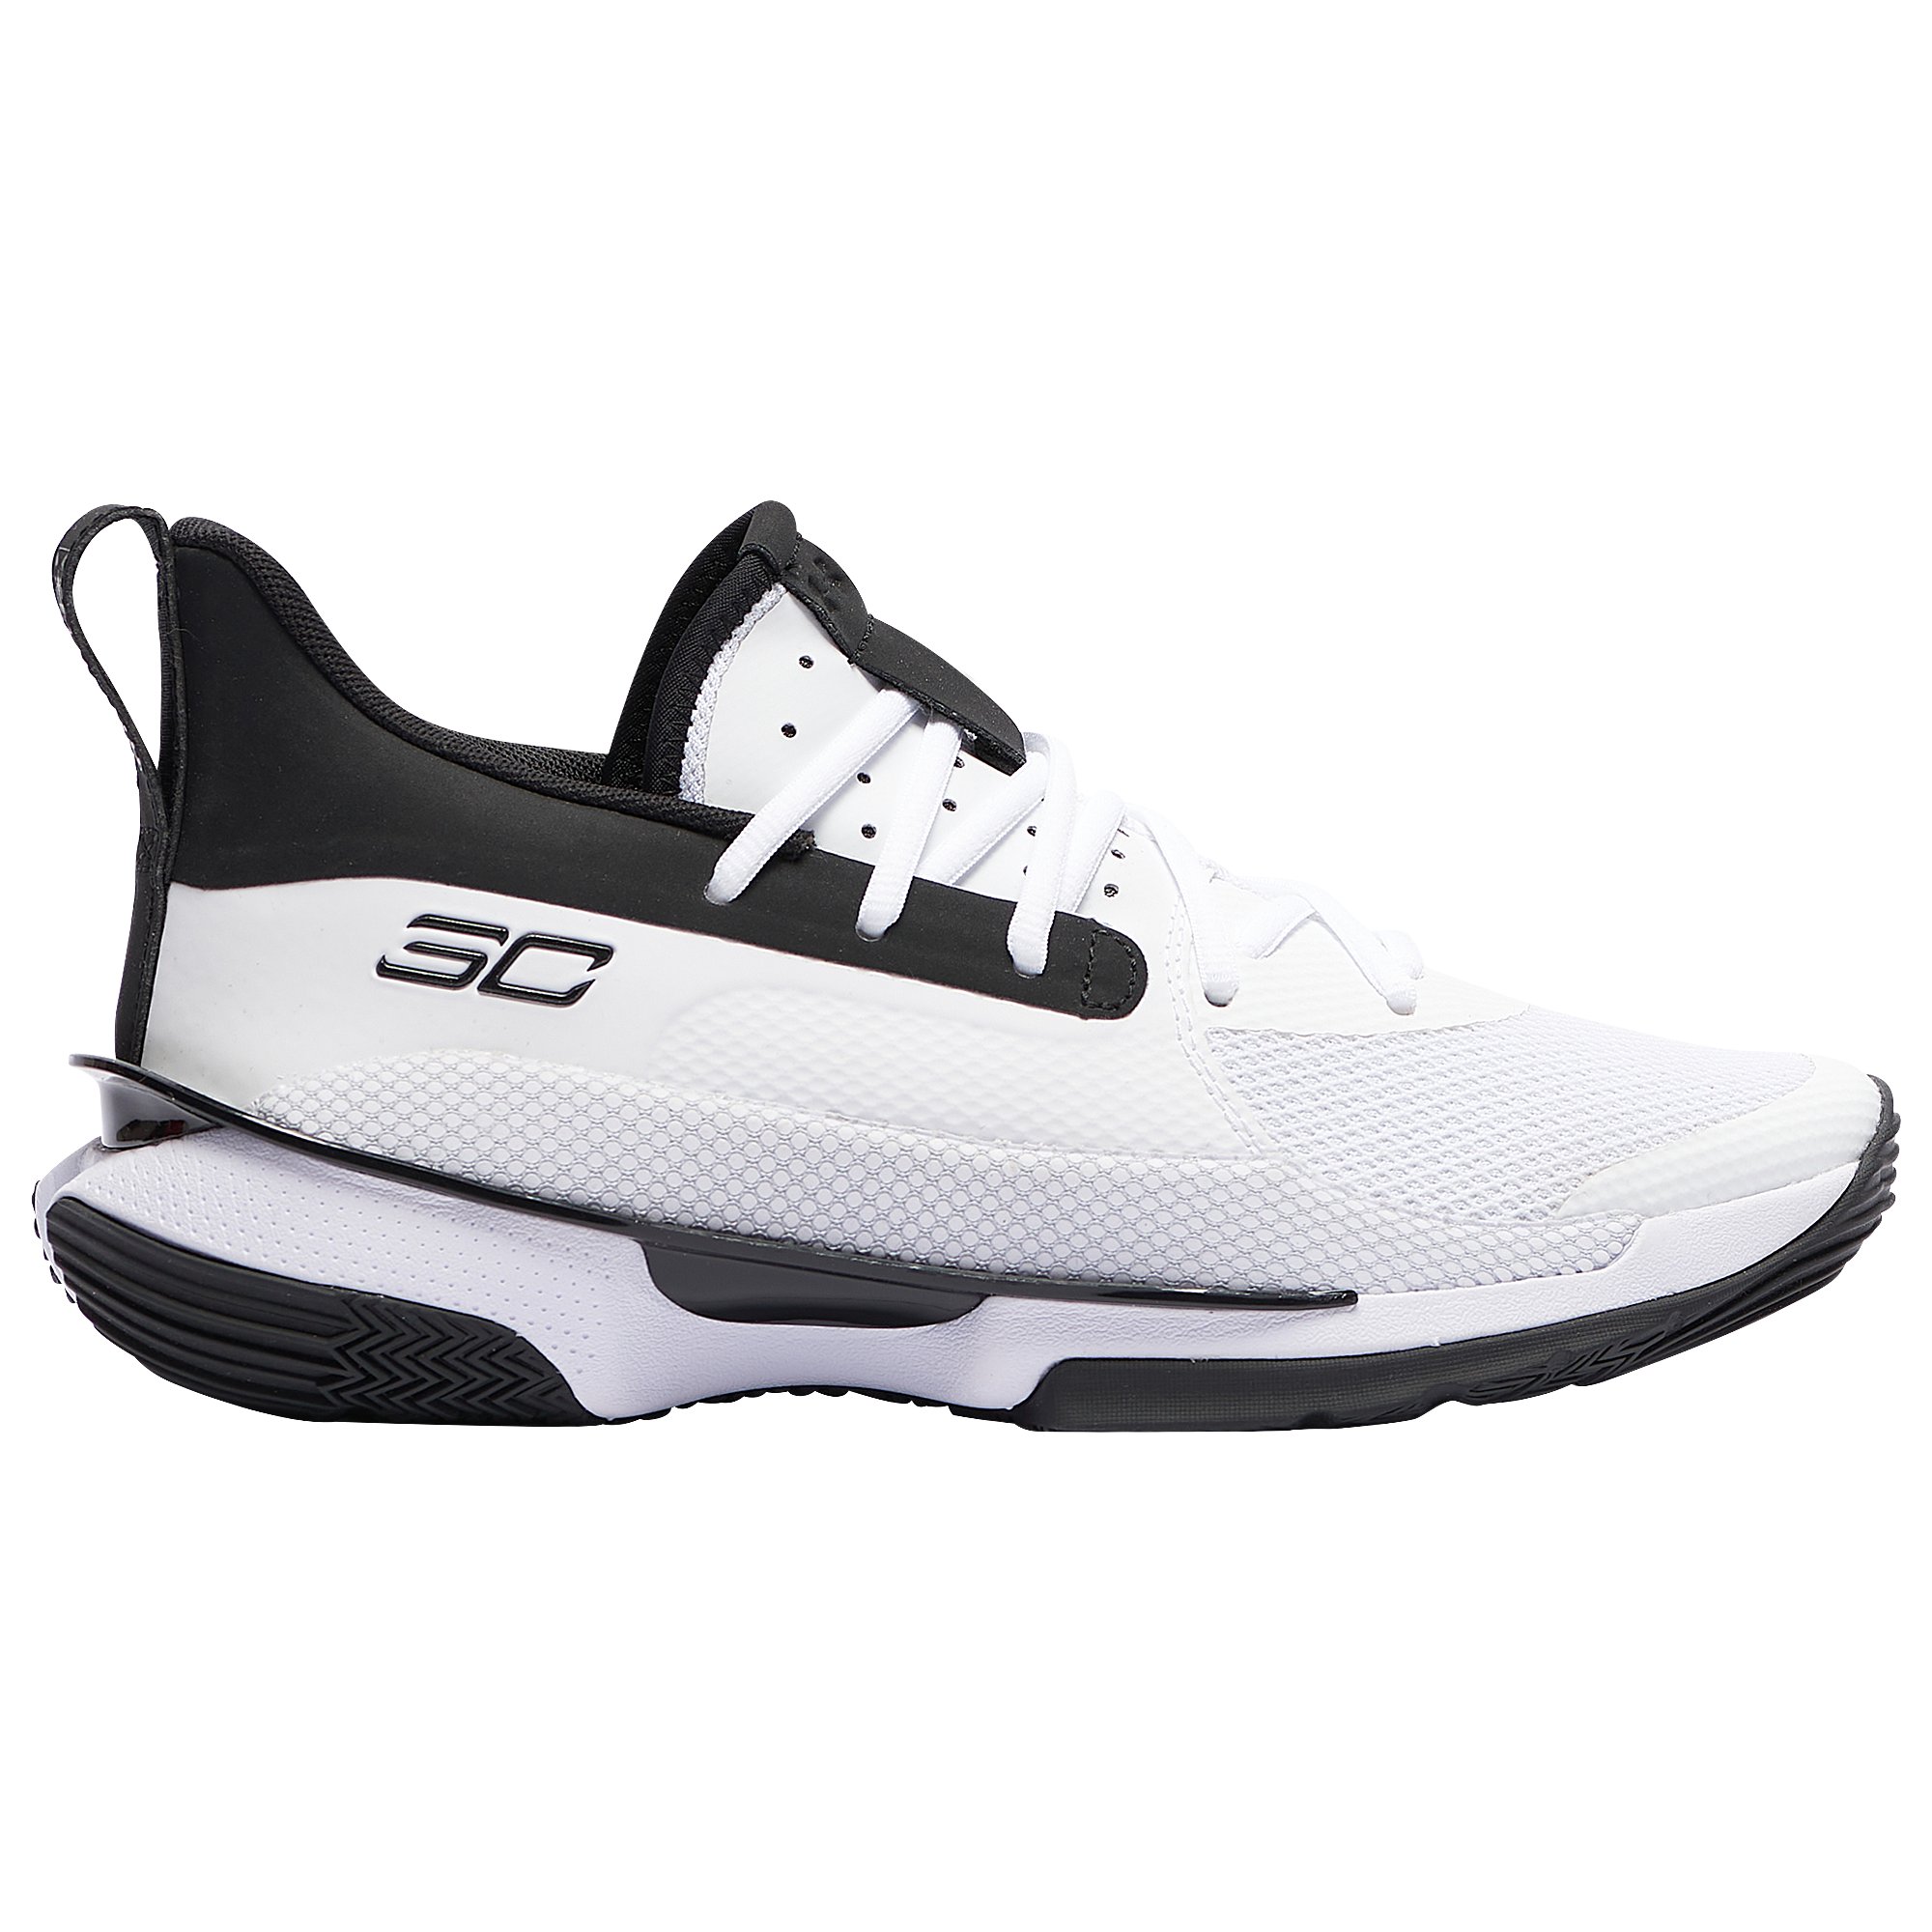 Under Armour Men's Team Curry 7 Basketball Shoes | eBay